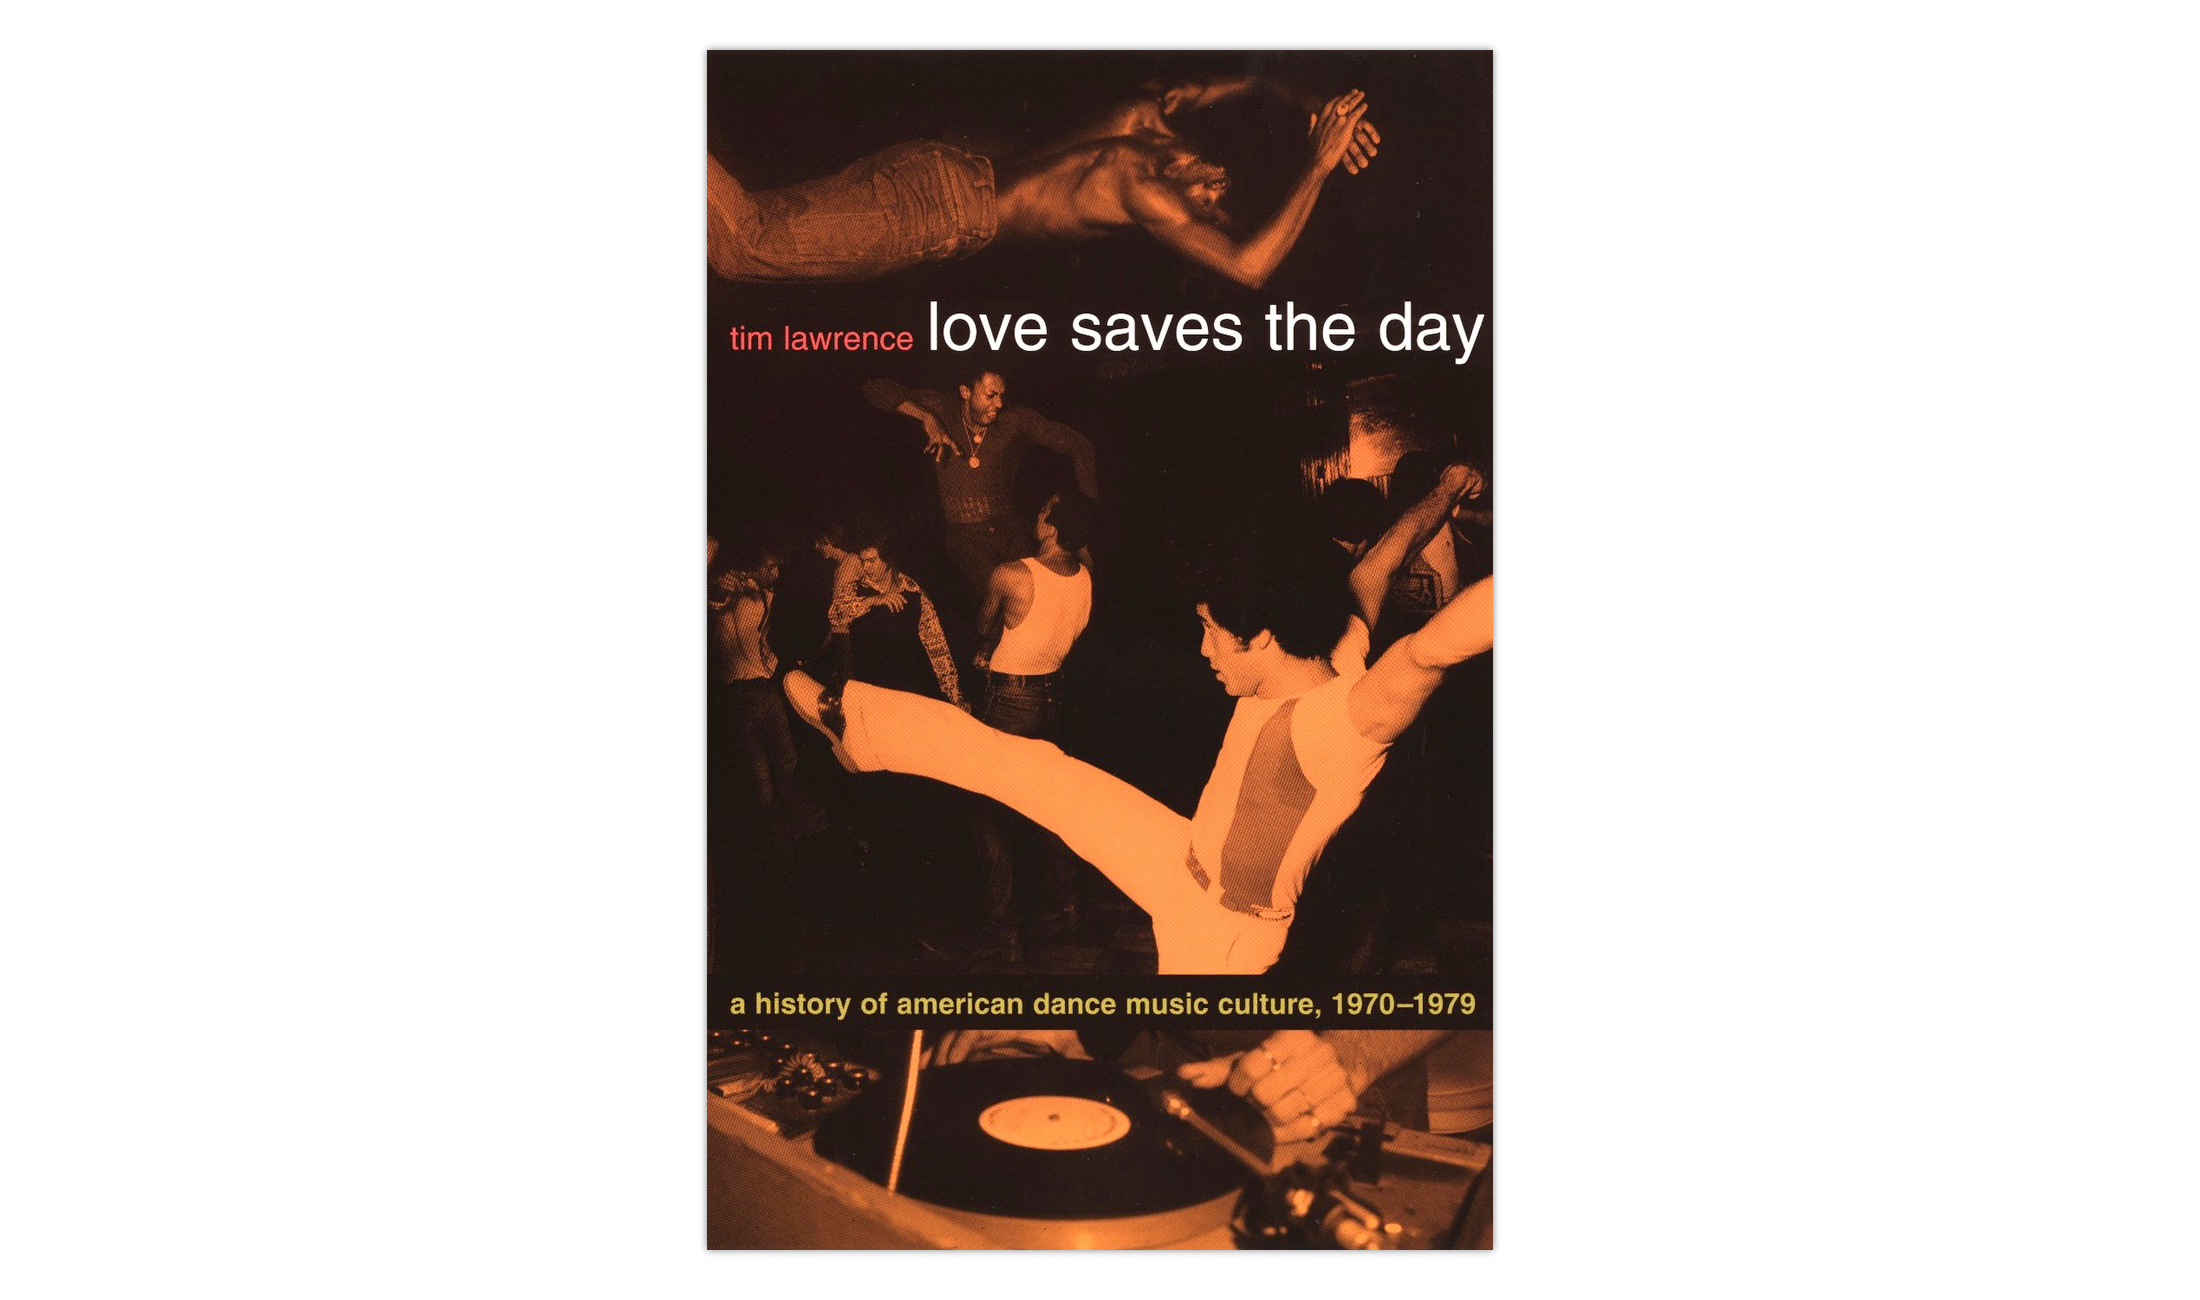 Love Saves the Day. A History of American Dance Music Culture 1970-1979 (2004) von Tim Lawrence.